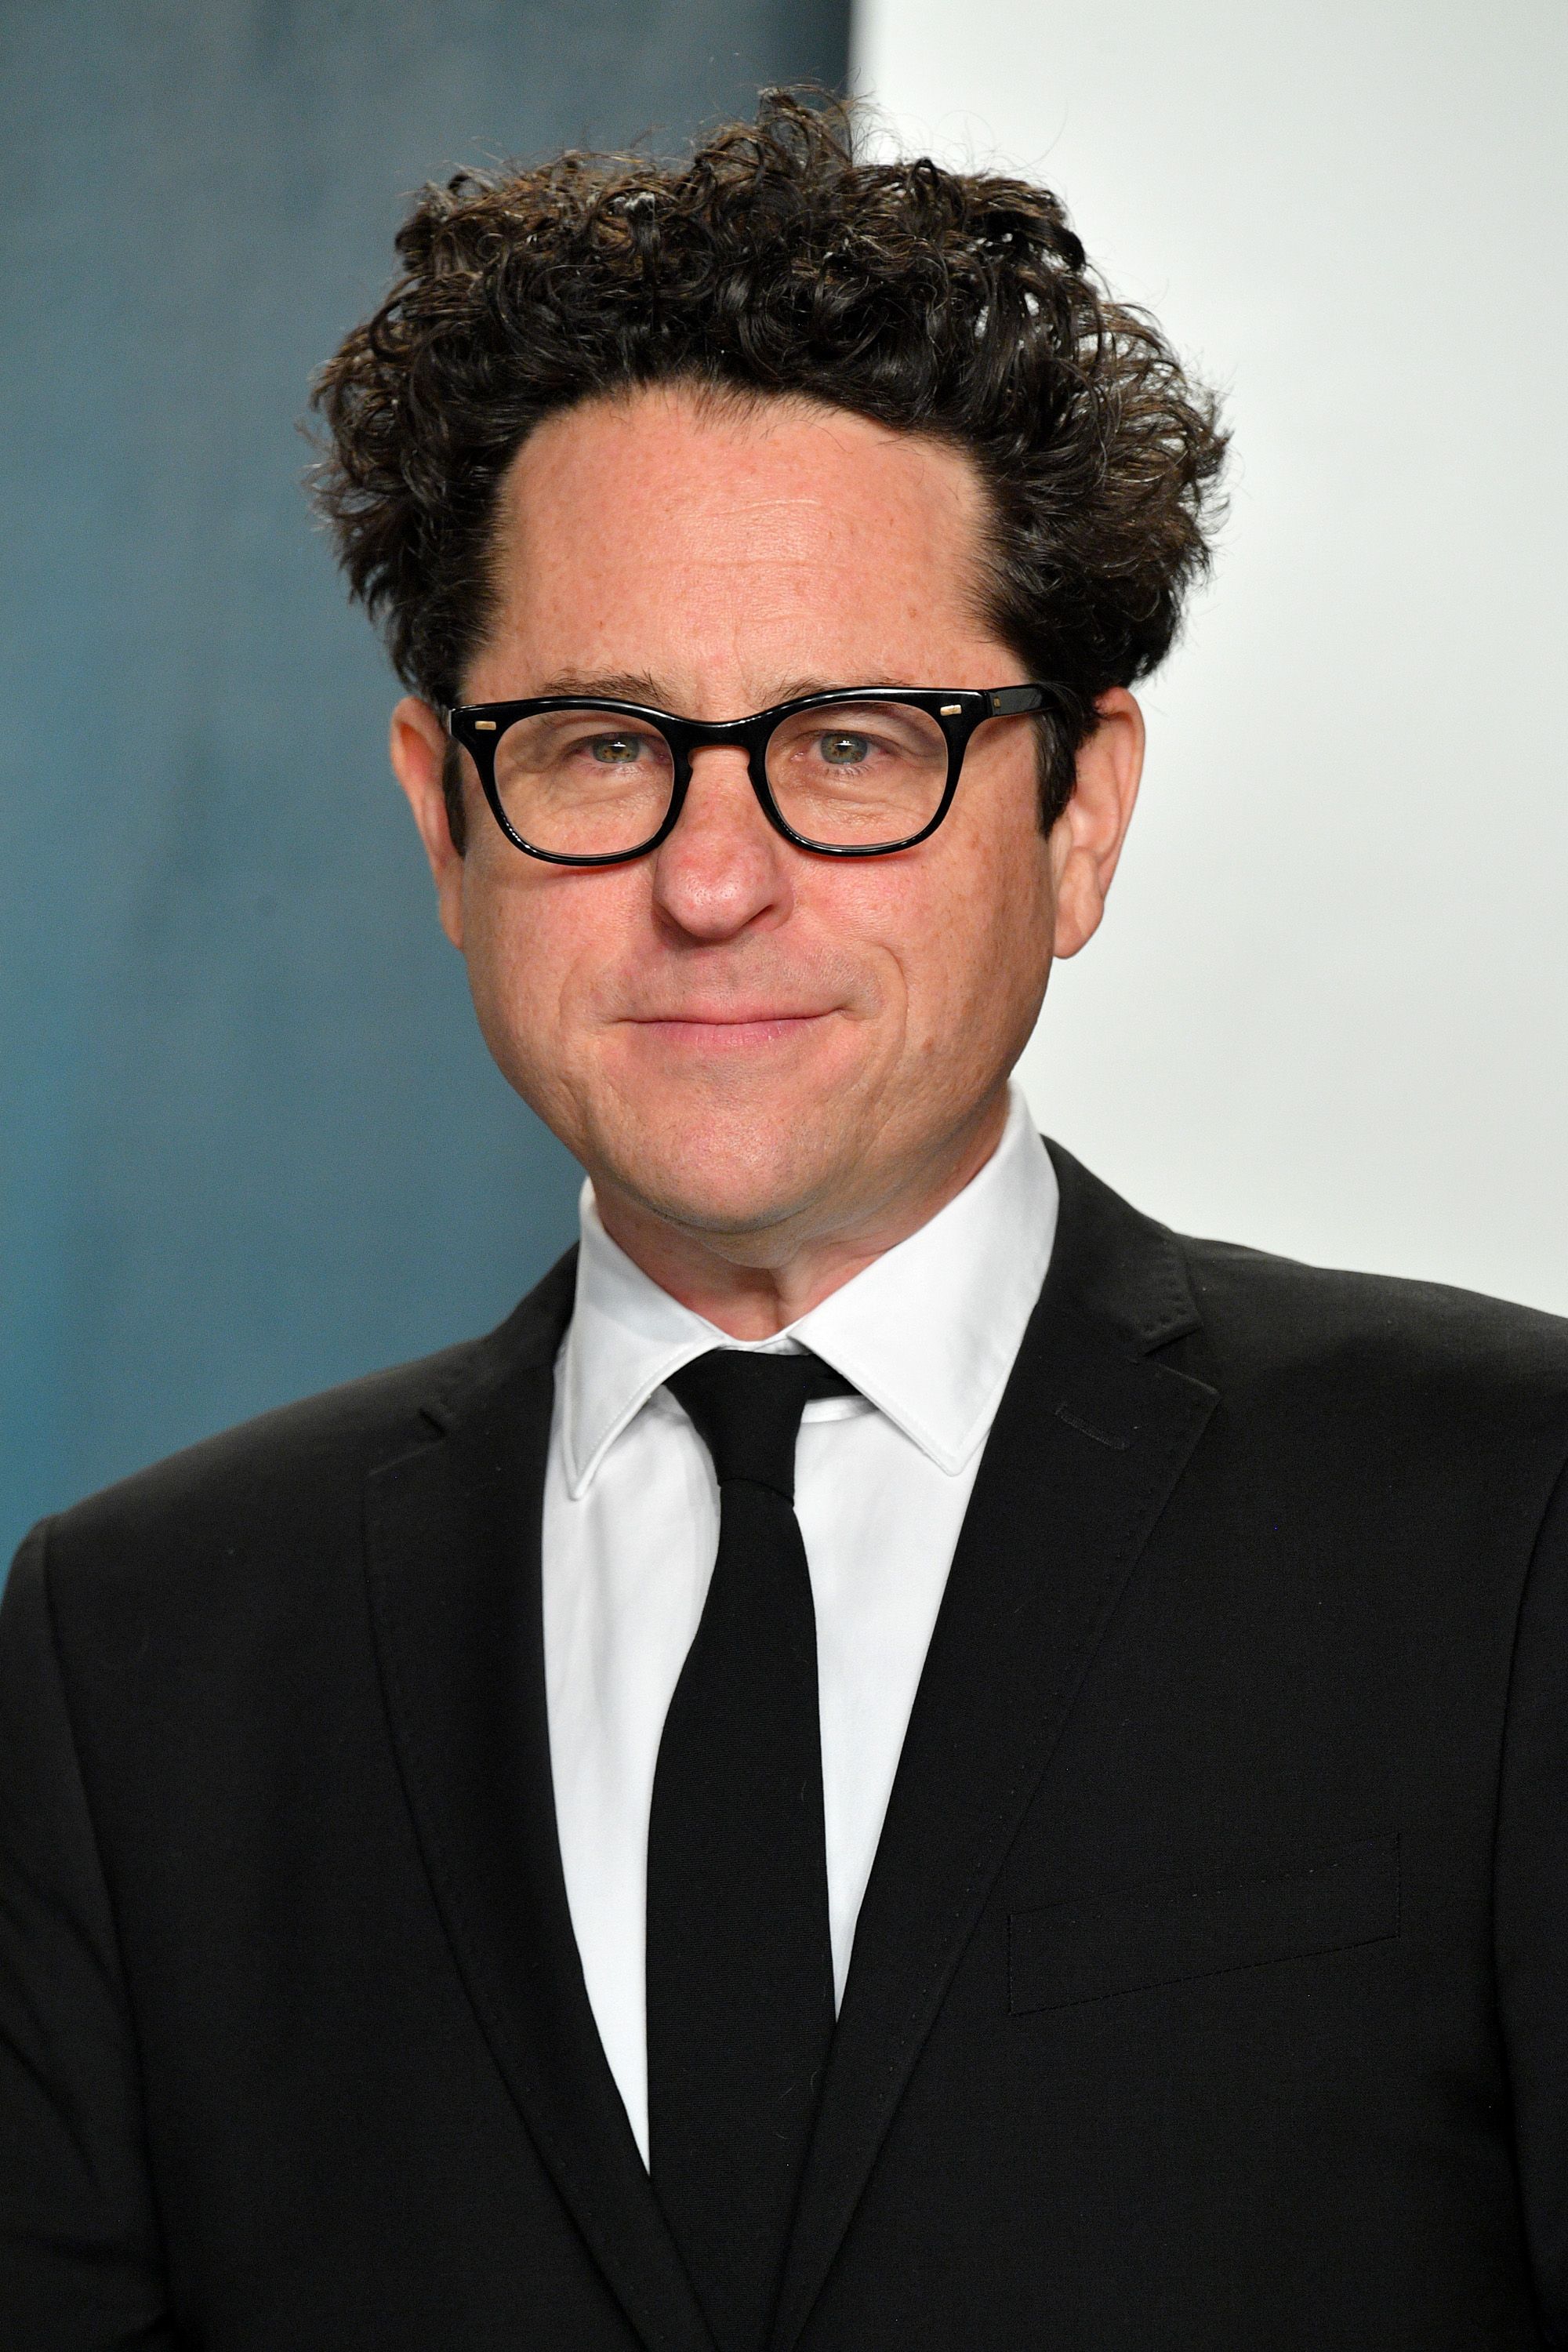 J.J. Abrams' 'Duster' Series Picked Up at HBO Max – The Hollywood